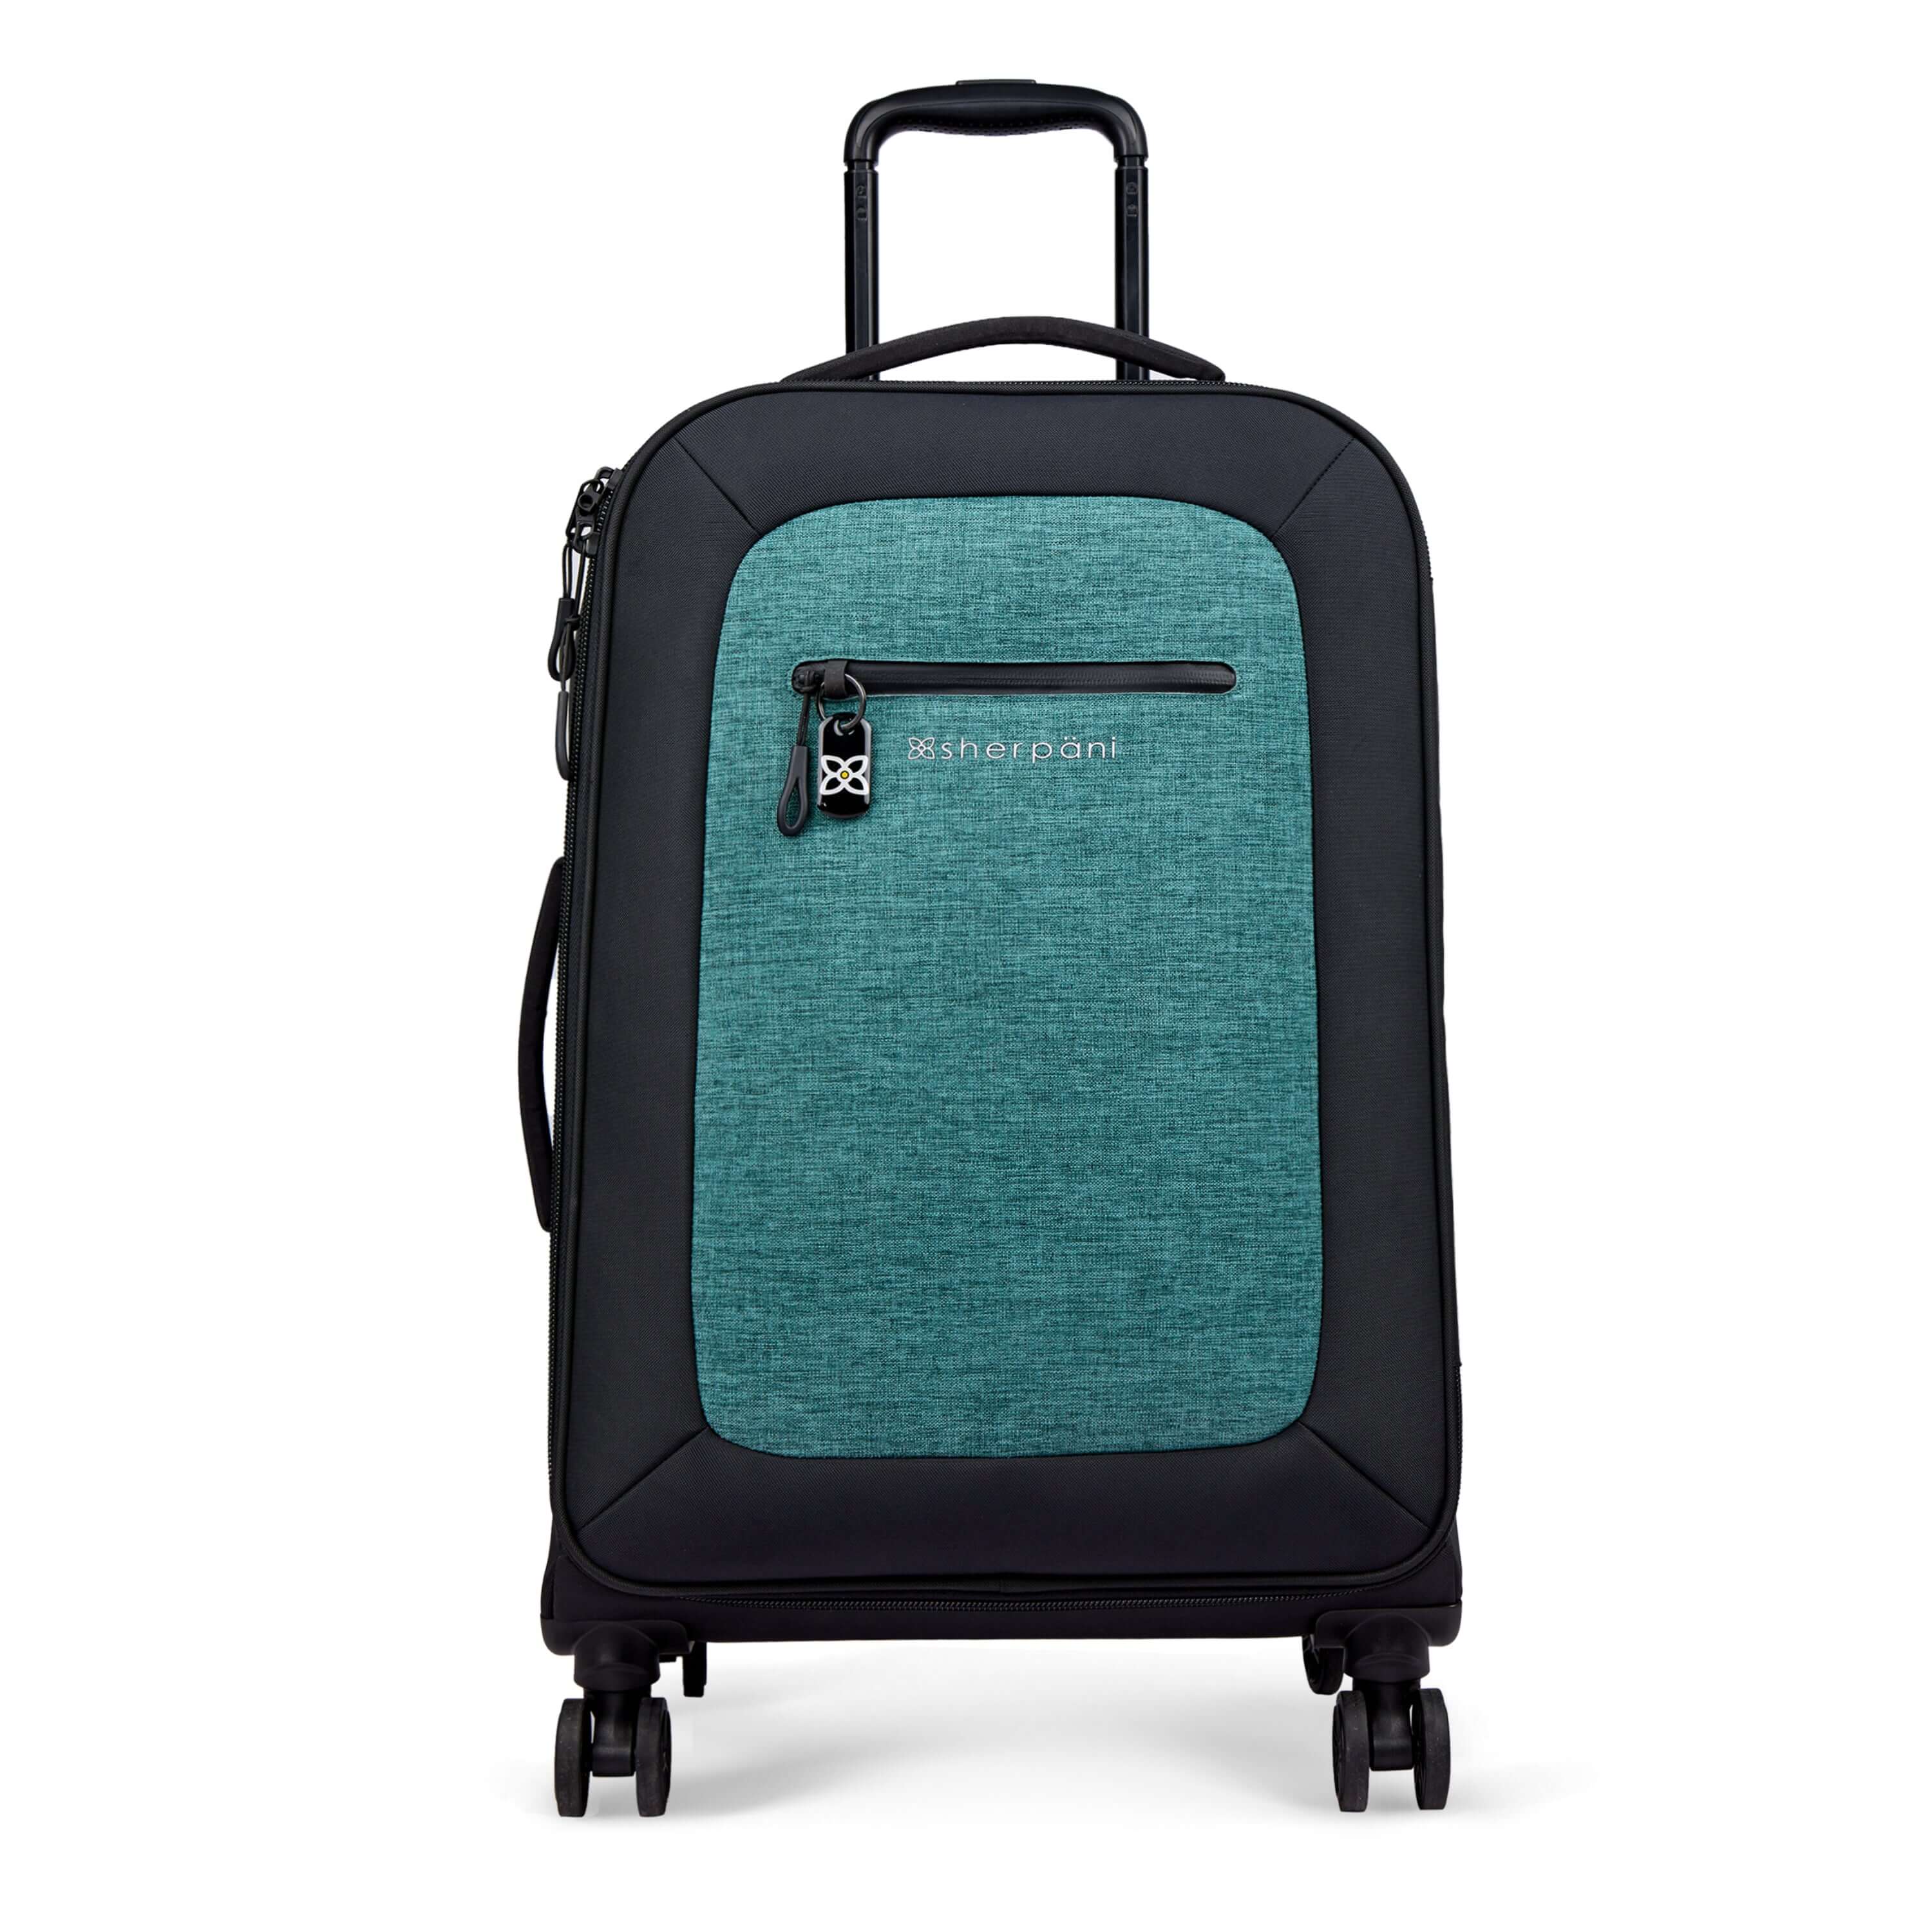 Flat front view of Sherpani’s Anti-Theft luggage the Hemisphere in Teal. The suitcase has a soft shell exterior made from recycled plastic bottles and features vegan leather accents in black. There is a main zipper compartment and an external pocket on the front with a locking zipper and a ReturnMe tag. On the top of the suitcase sits a retractable luggage handle. On the top and side sit two easy-access handles. At the bottom are four 36-degree spinner wheels for smooth rolling. 